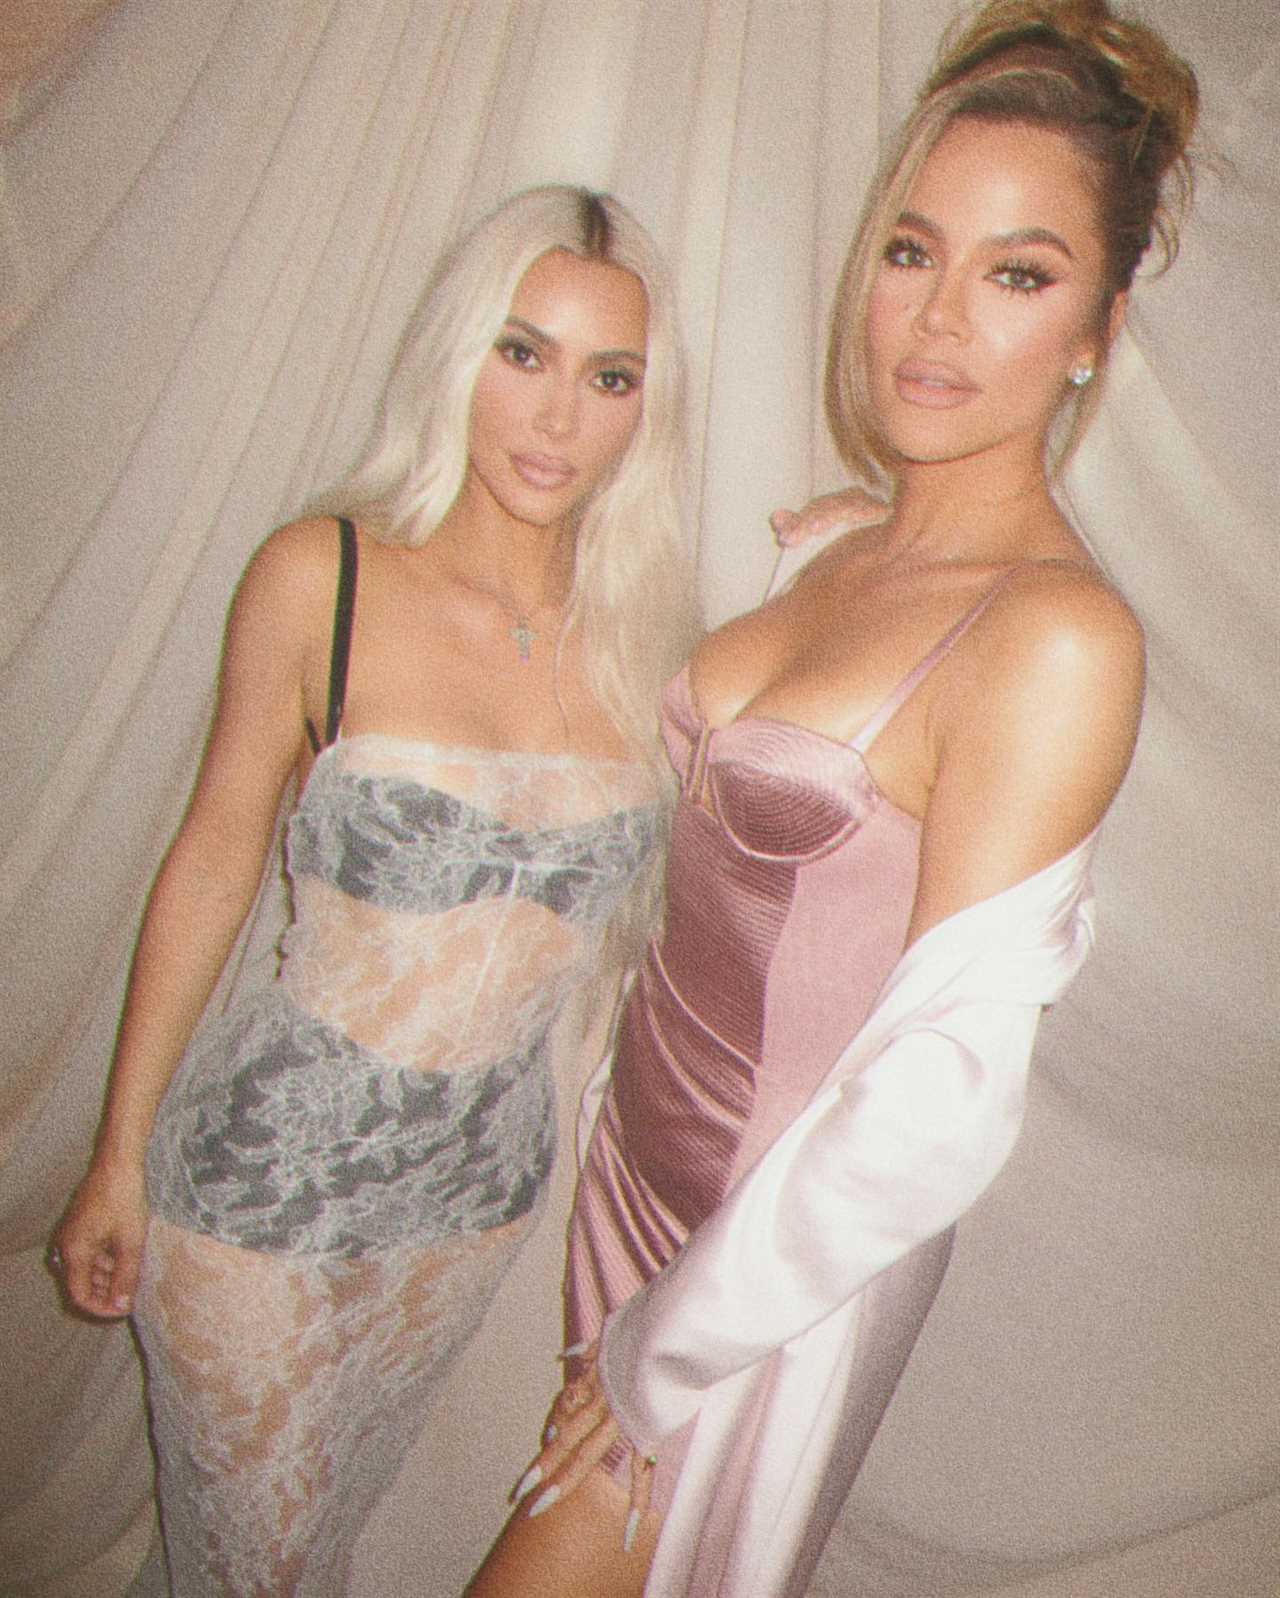 Kardashian fans ‘disgusted’ as Kourtney makes ‘toxic’ comment about Kim’s appearance in shocking video